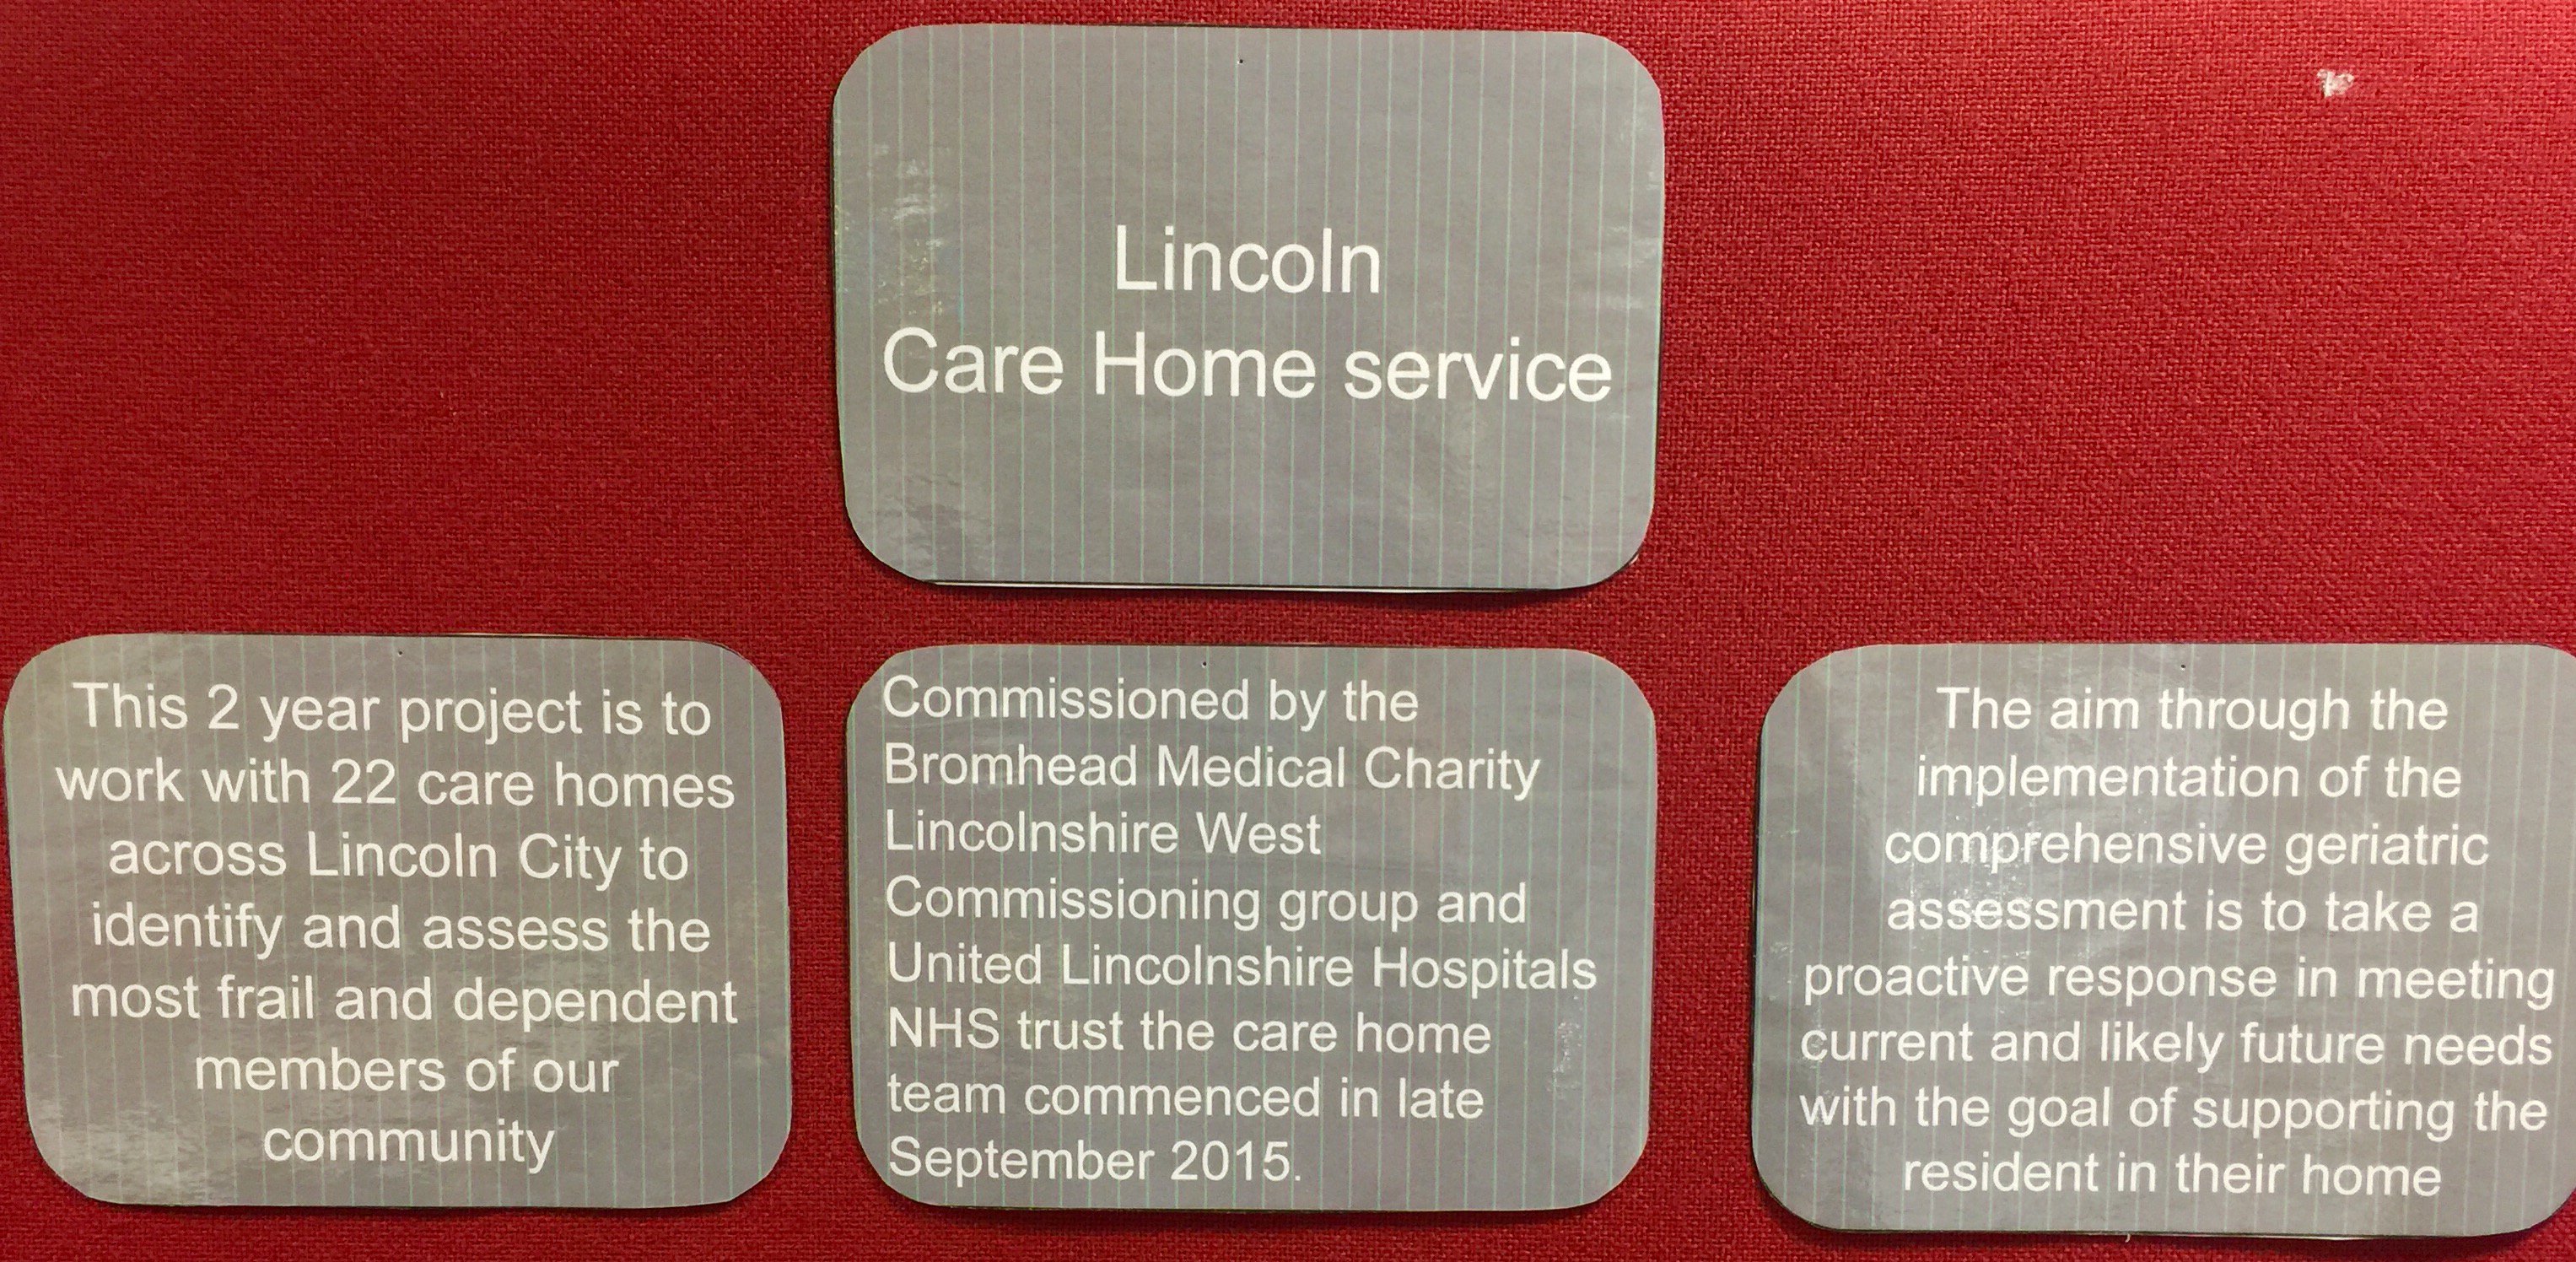 Lincoln Home Care service featured image